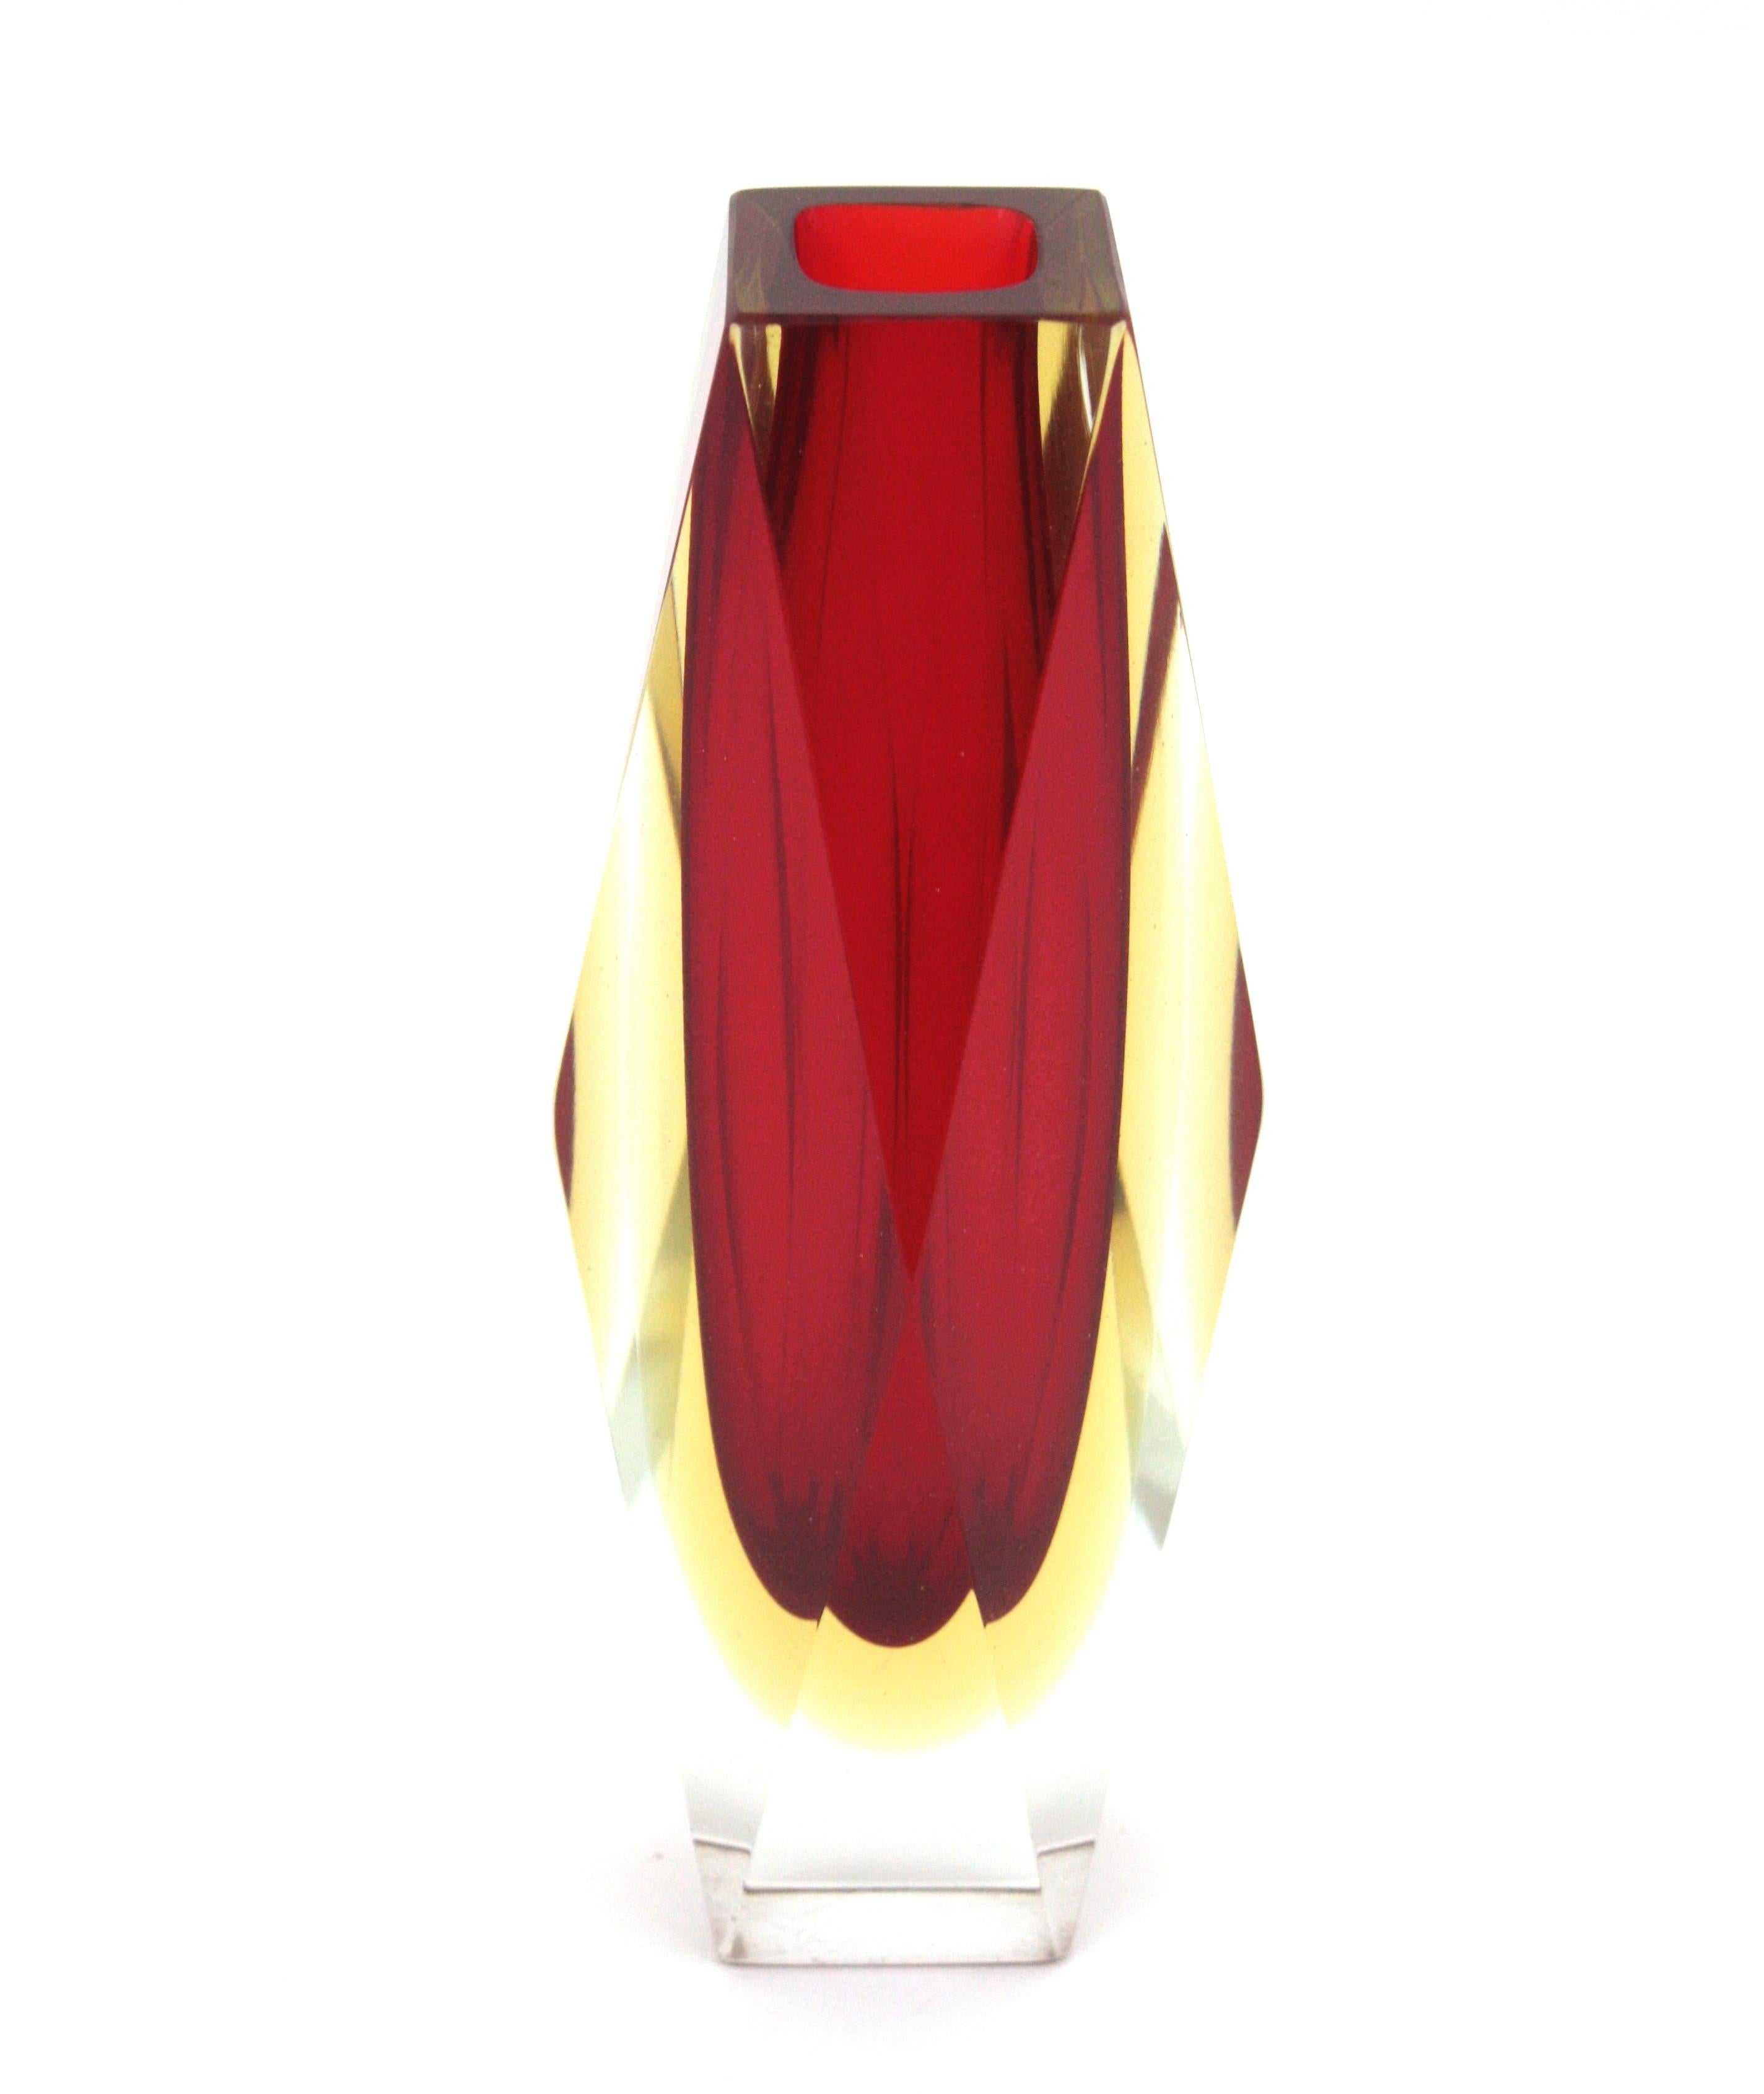 20th Century Mandruzzato Murano Faceted Sommerso Red and Yellow Art Glass Vase For Sale